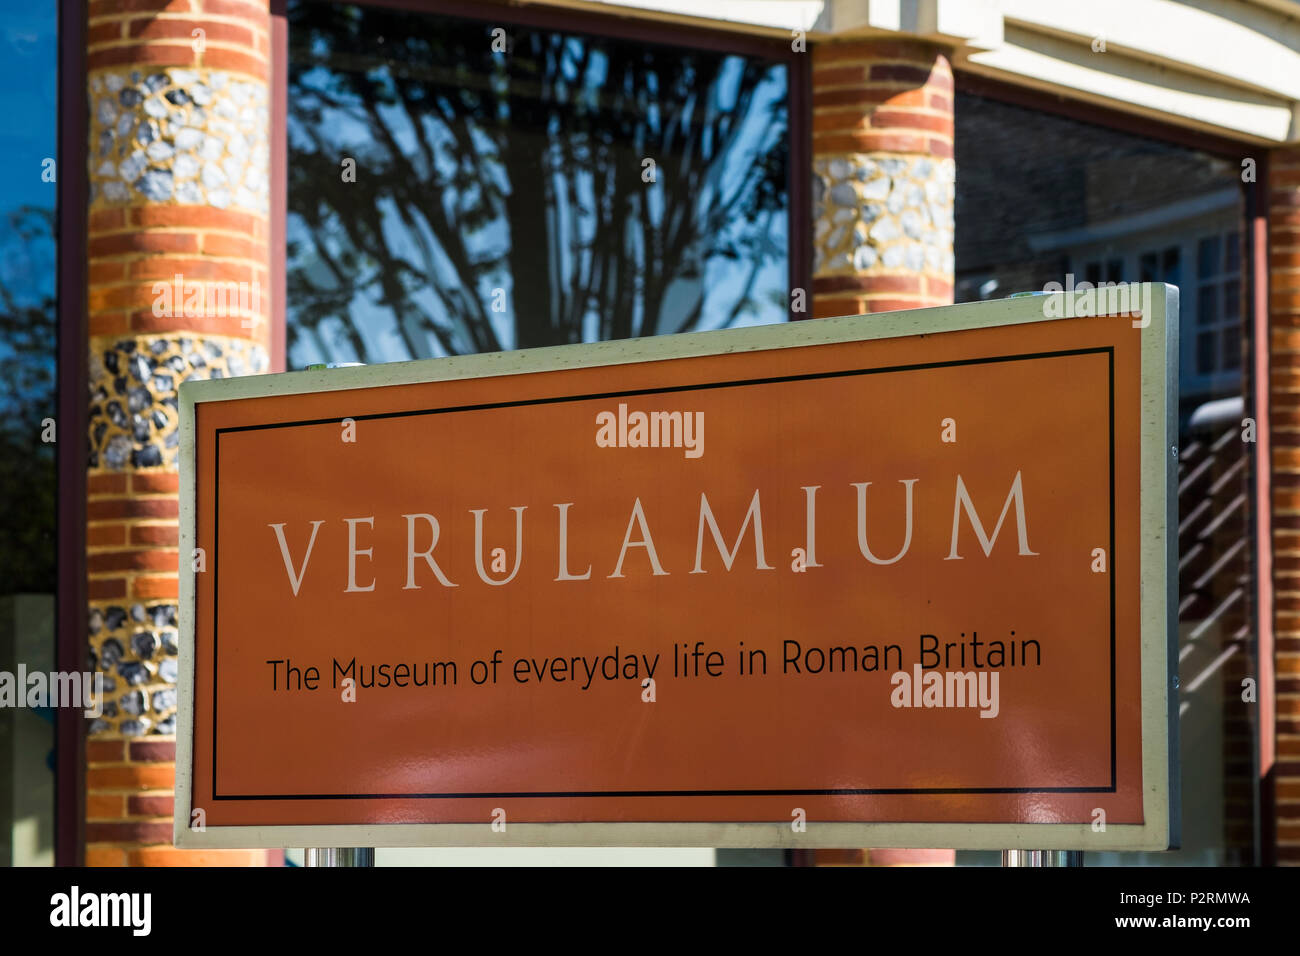 St.Albans city in the county of Hertfordshire was formerly the Roman city of Verulamium and now a London commuter town, England, U.K. Stock Photo